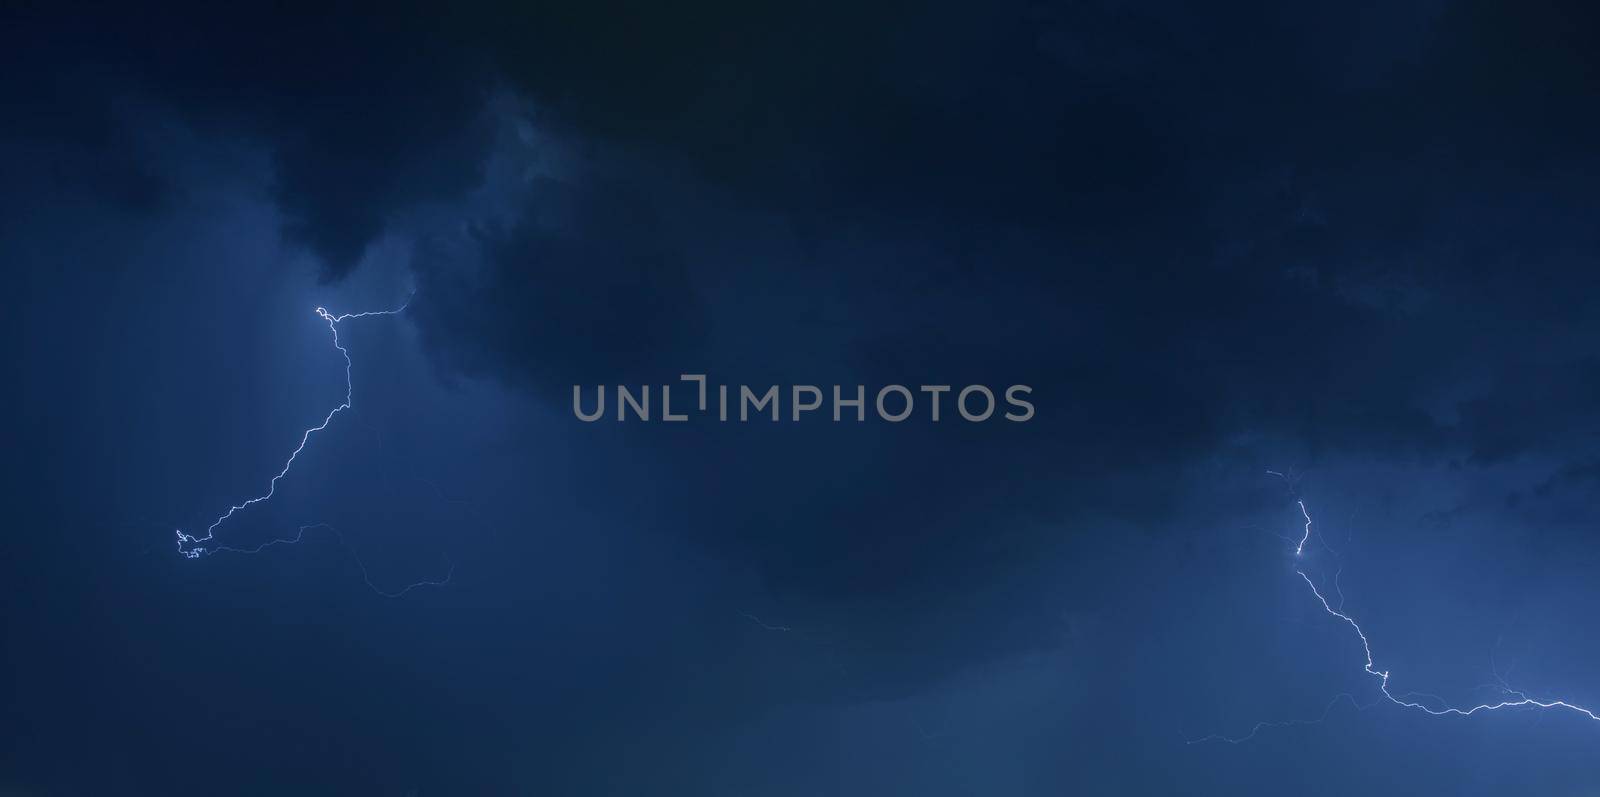 Dark Blue Stormy Sky Photo Background. Weather Photo Collection. by welcomia